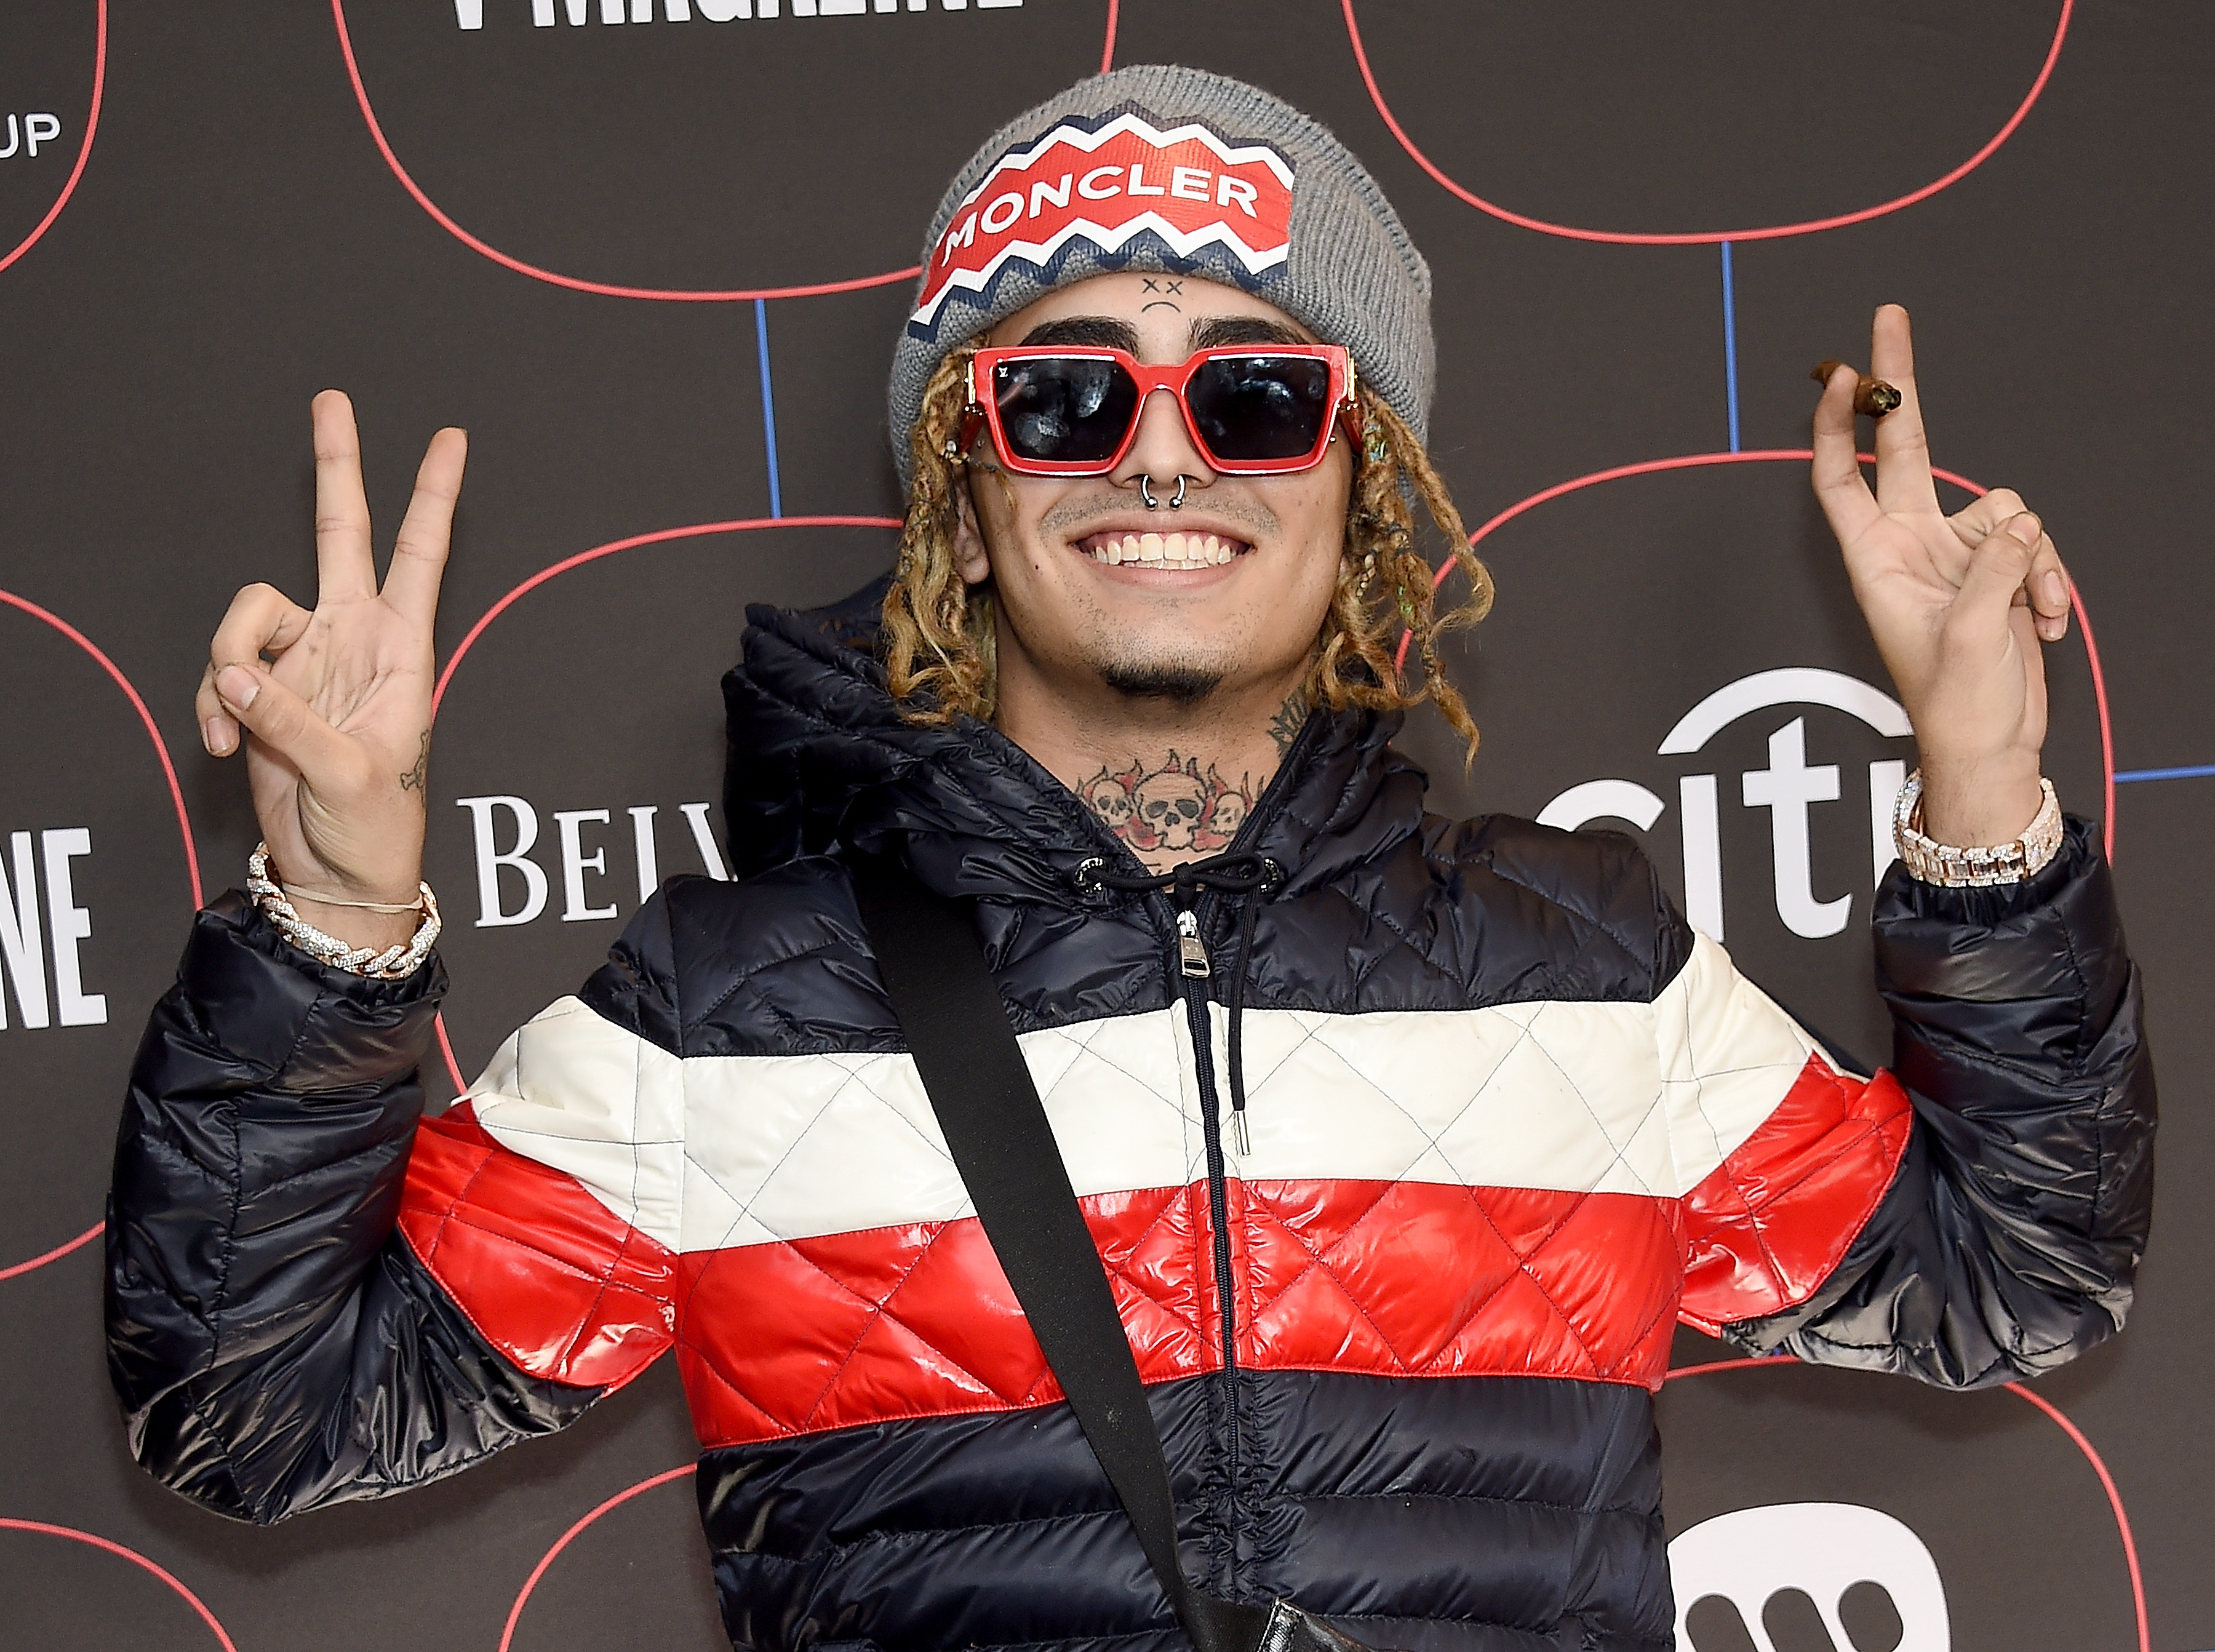 Donald Trump Introduces Lil Pump as 'Lil Pimp' At Pre-Election Rally